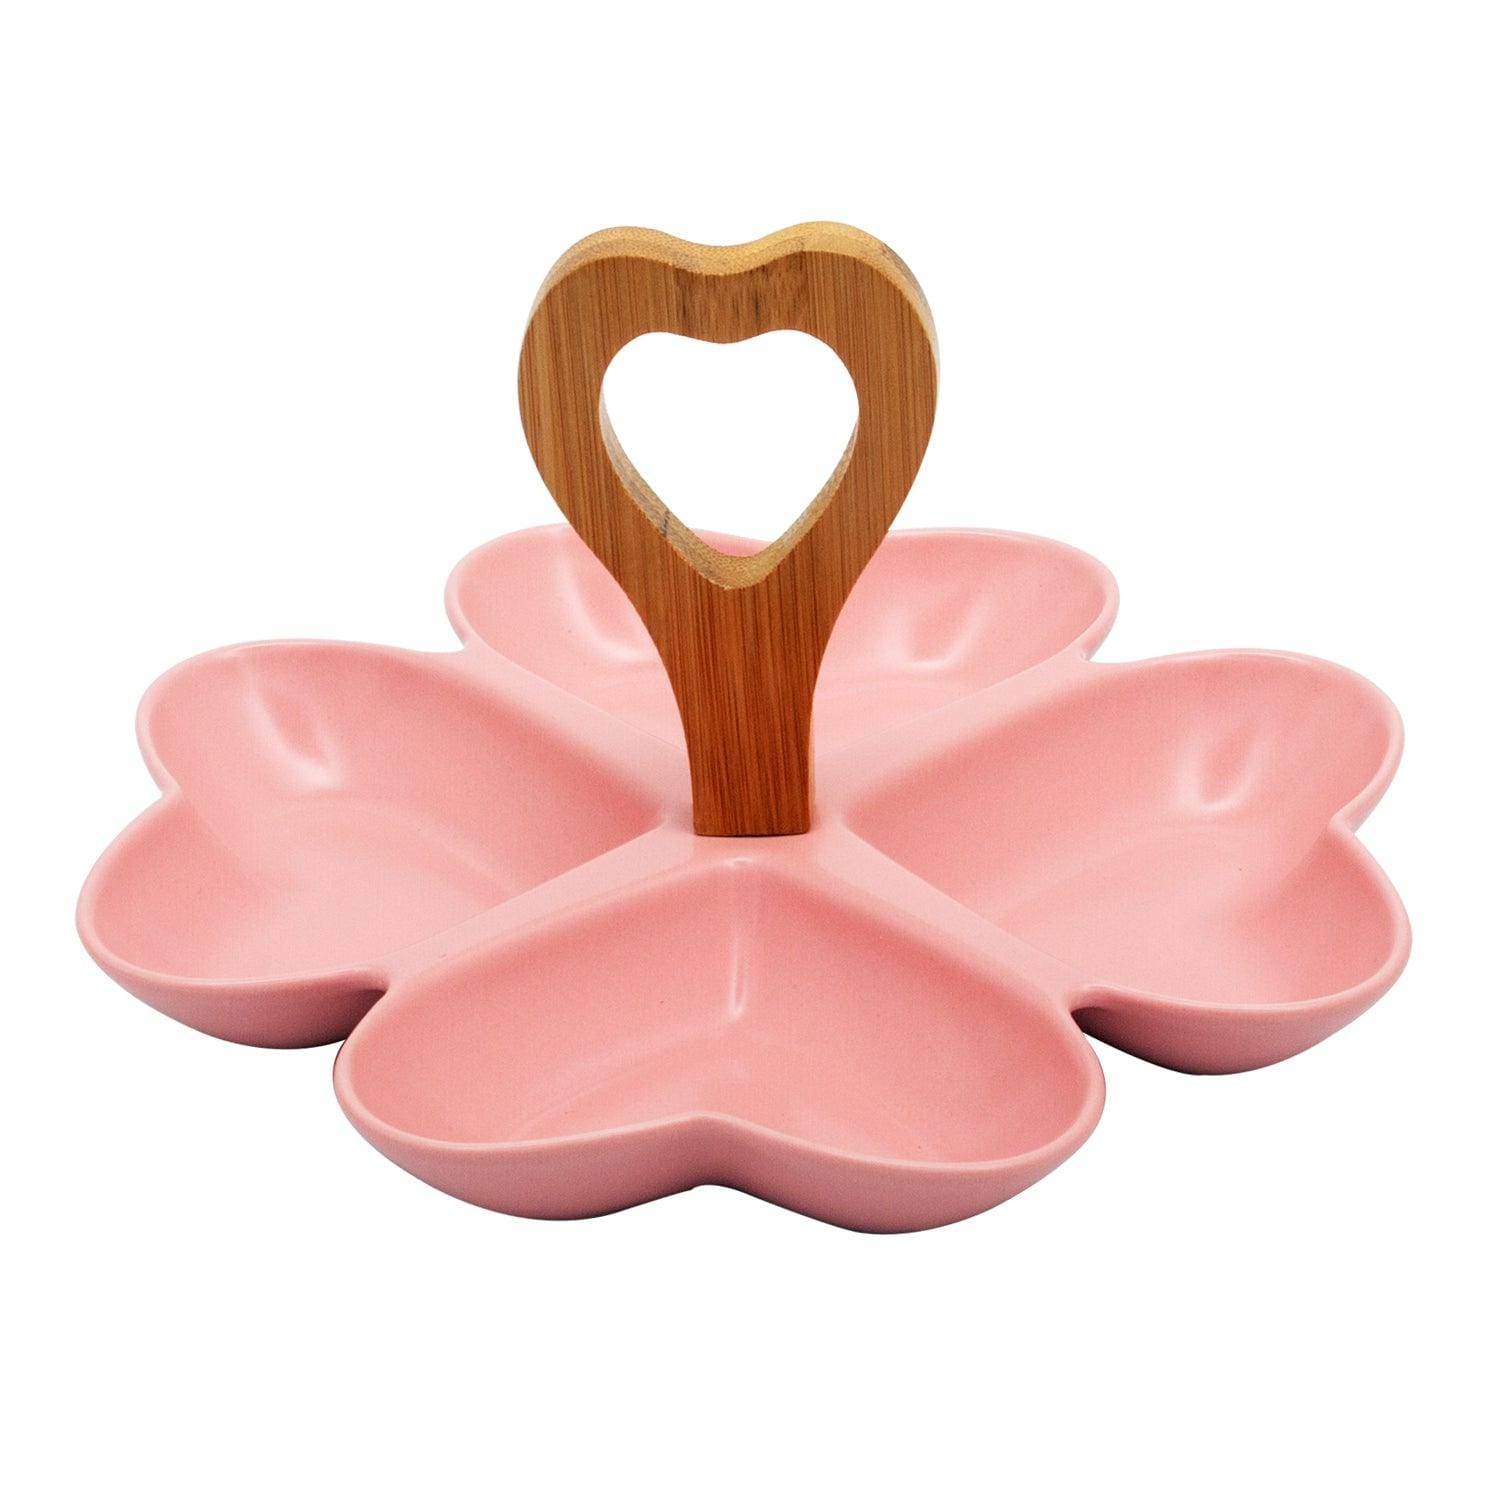 4 Compartment Hearty Pink Ceramic Serving Platter with Wooden Handle